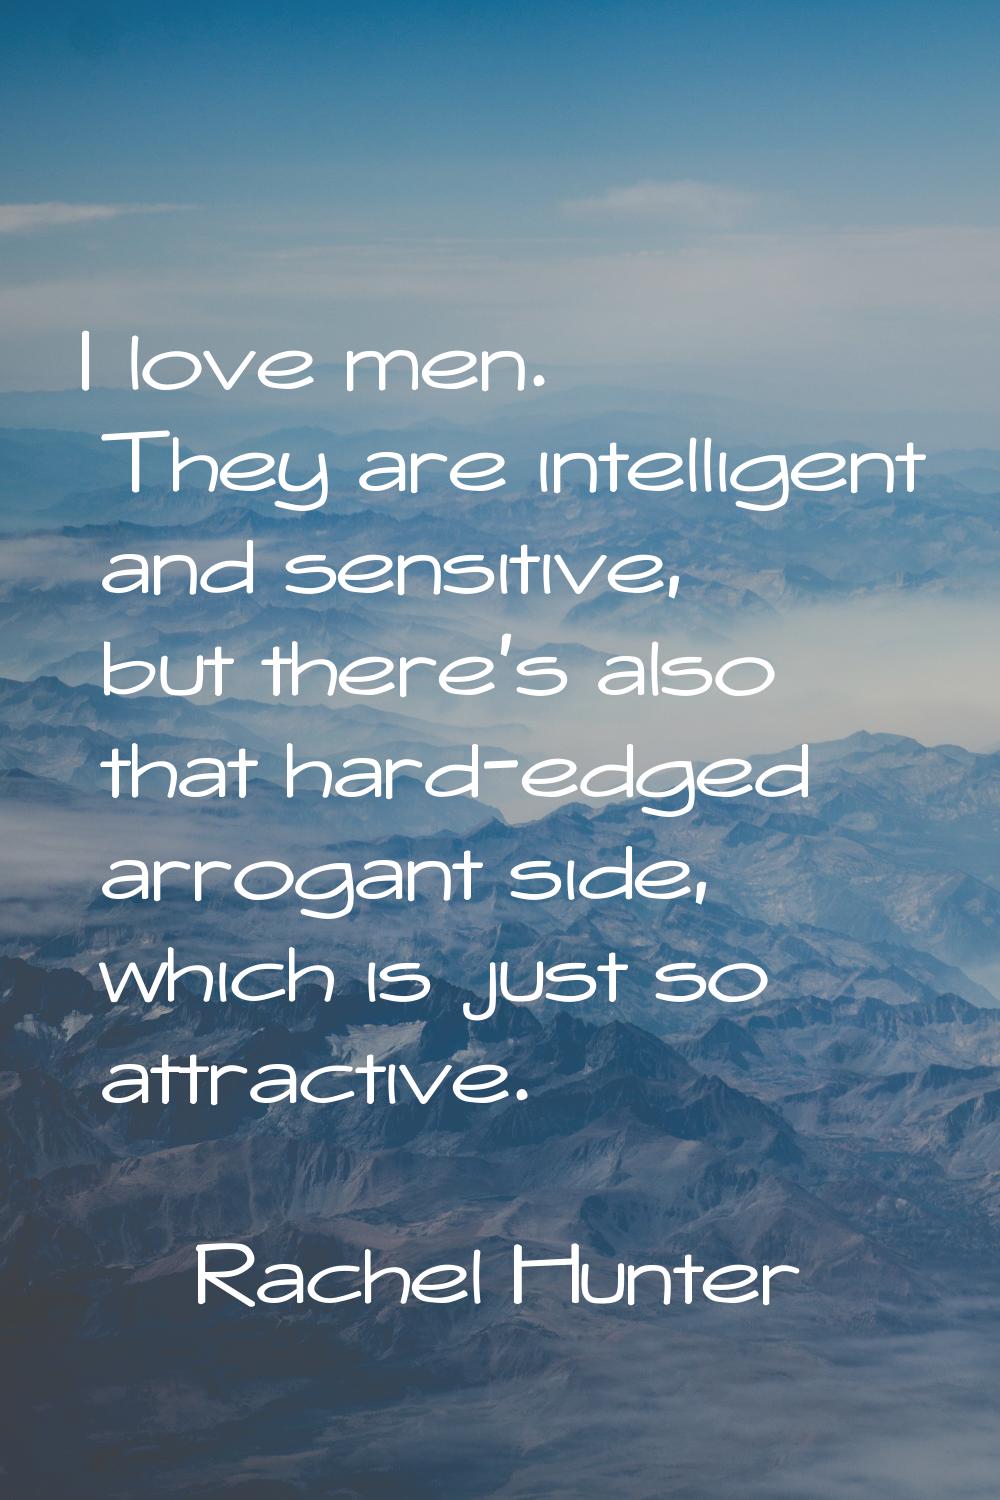 I love men. They are intelligent and sensitive, but there's also that hard-edged arrogant side, whi